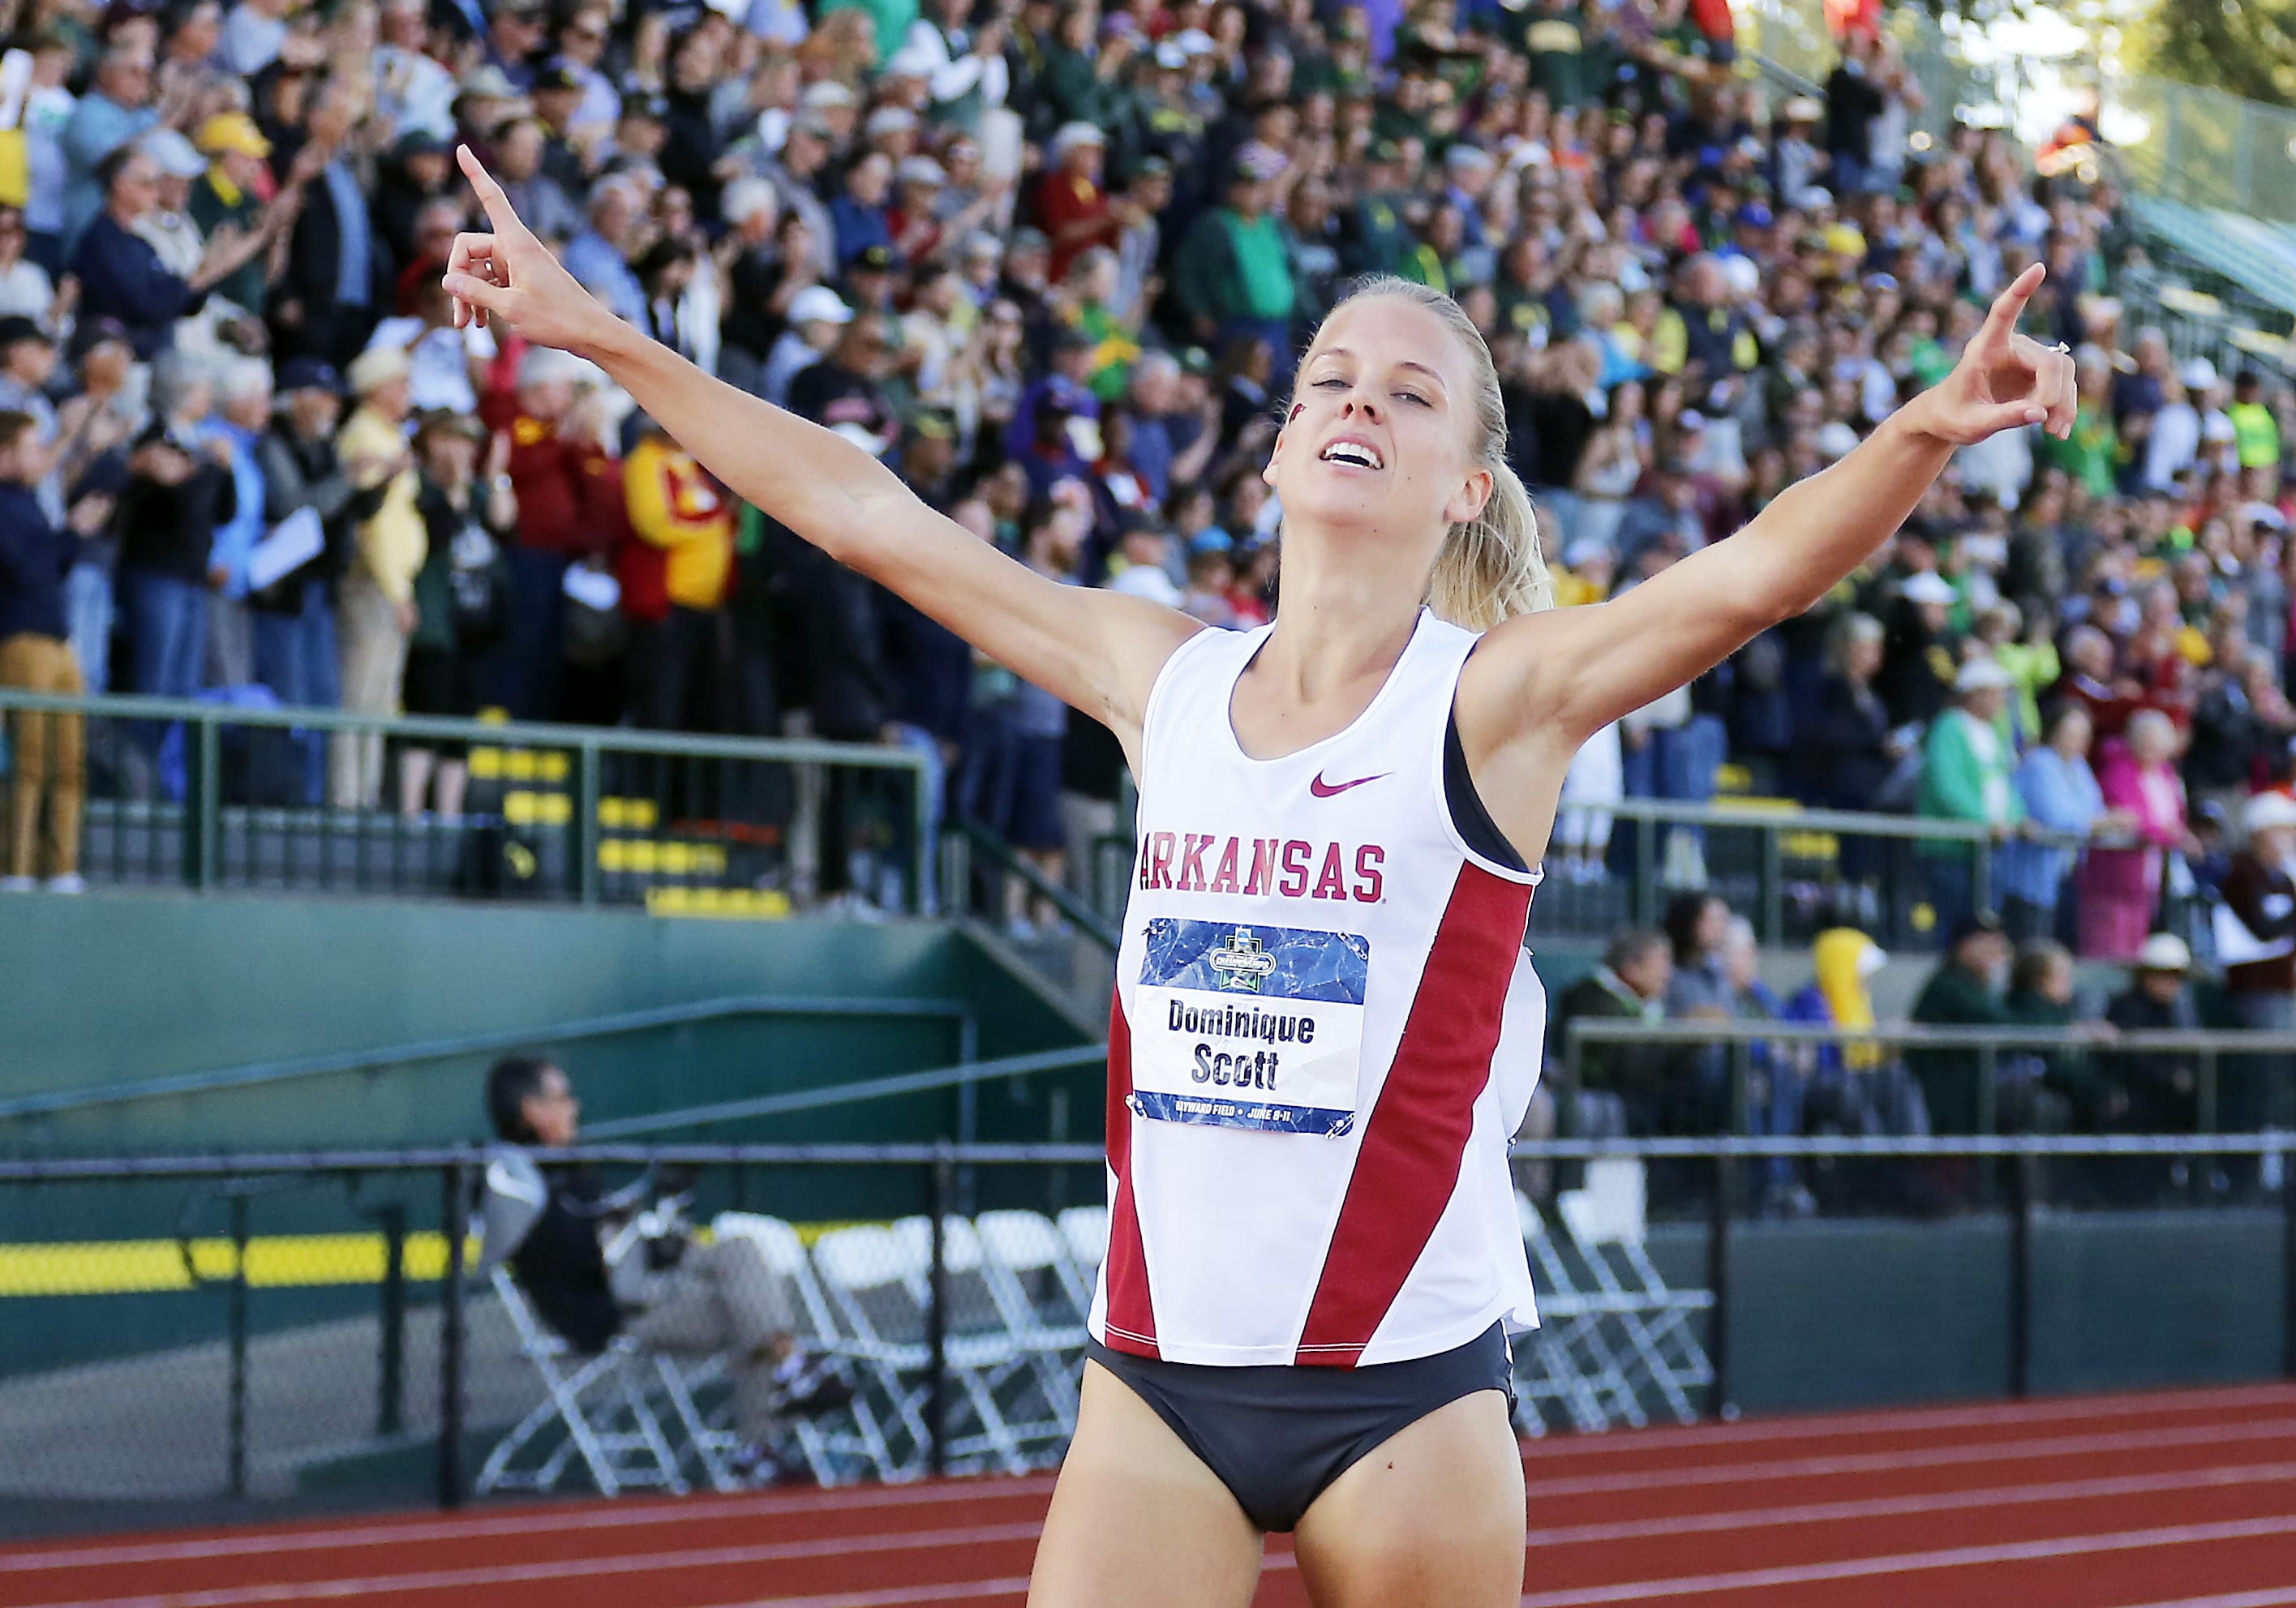 Arkansas' Dominique Scott points as she wins the women's 5,000 meters at the NCAA outdoor track and field championships in Eugene, Ore., Saturday, June 11, 2016.